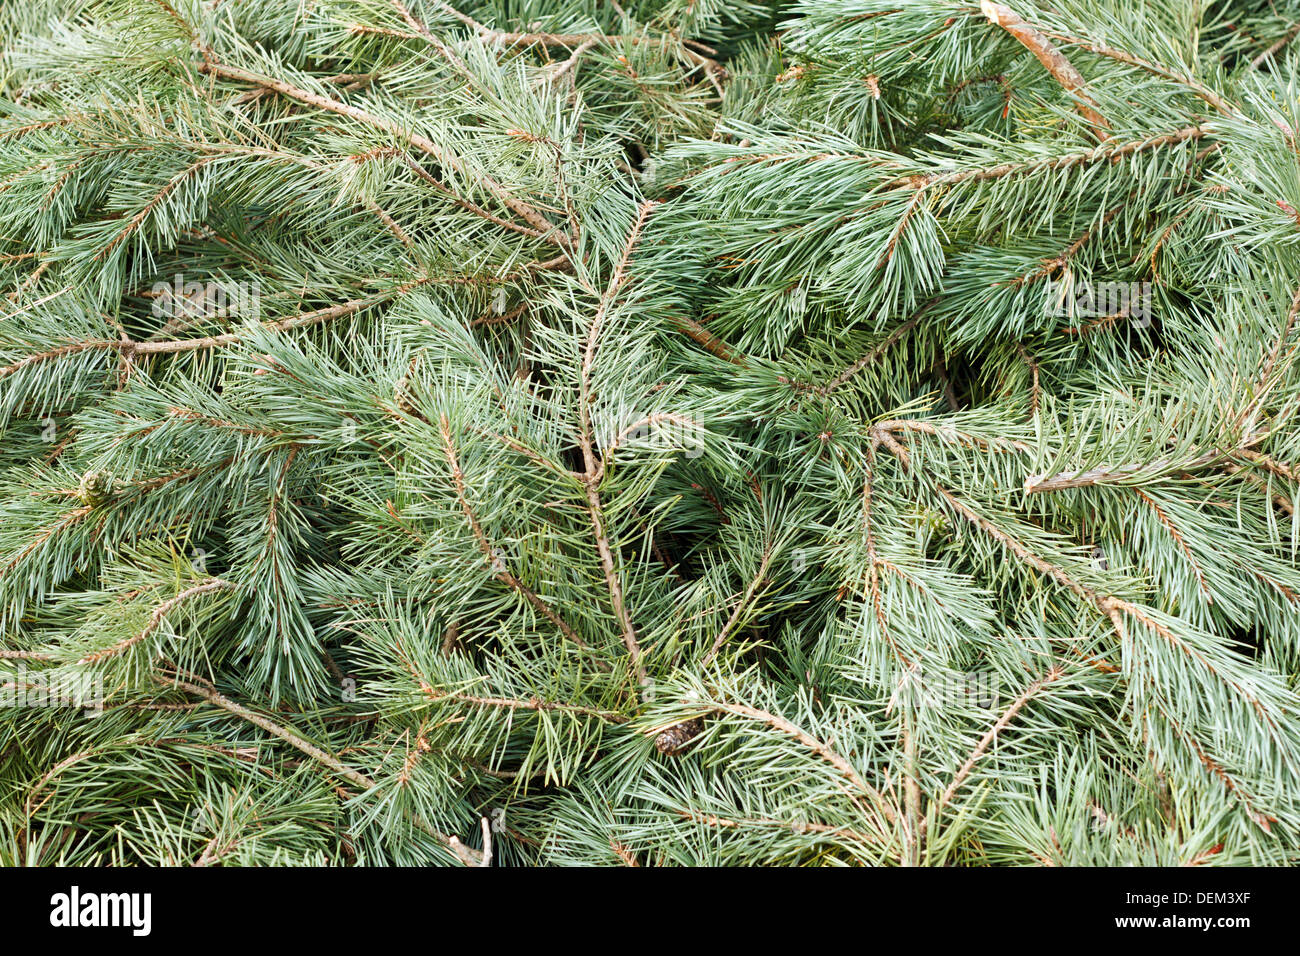 Background of branches and needles from a pine tree Stock Photo